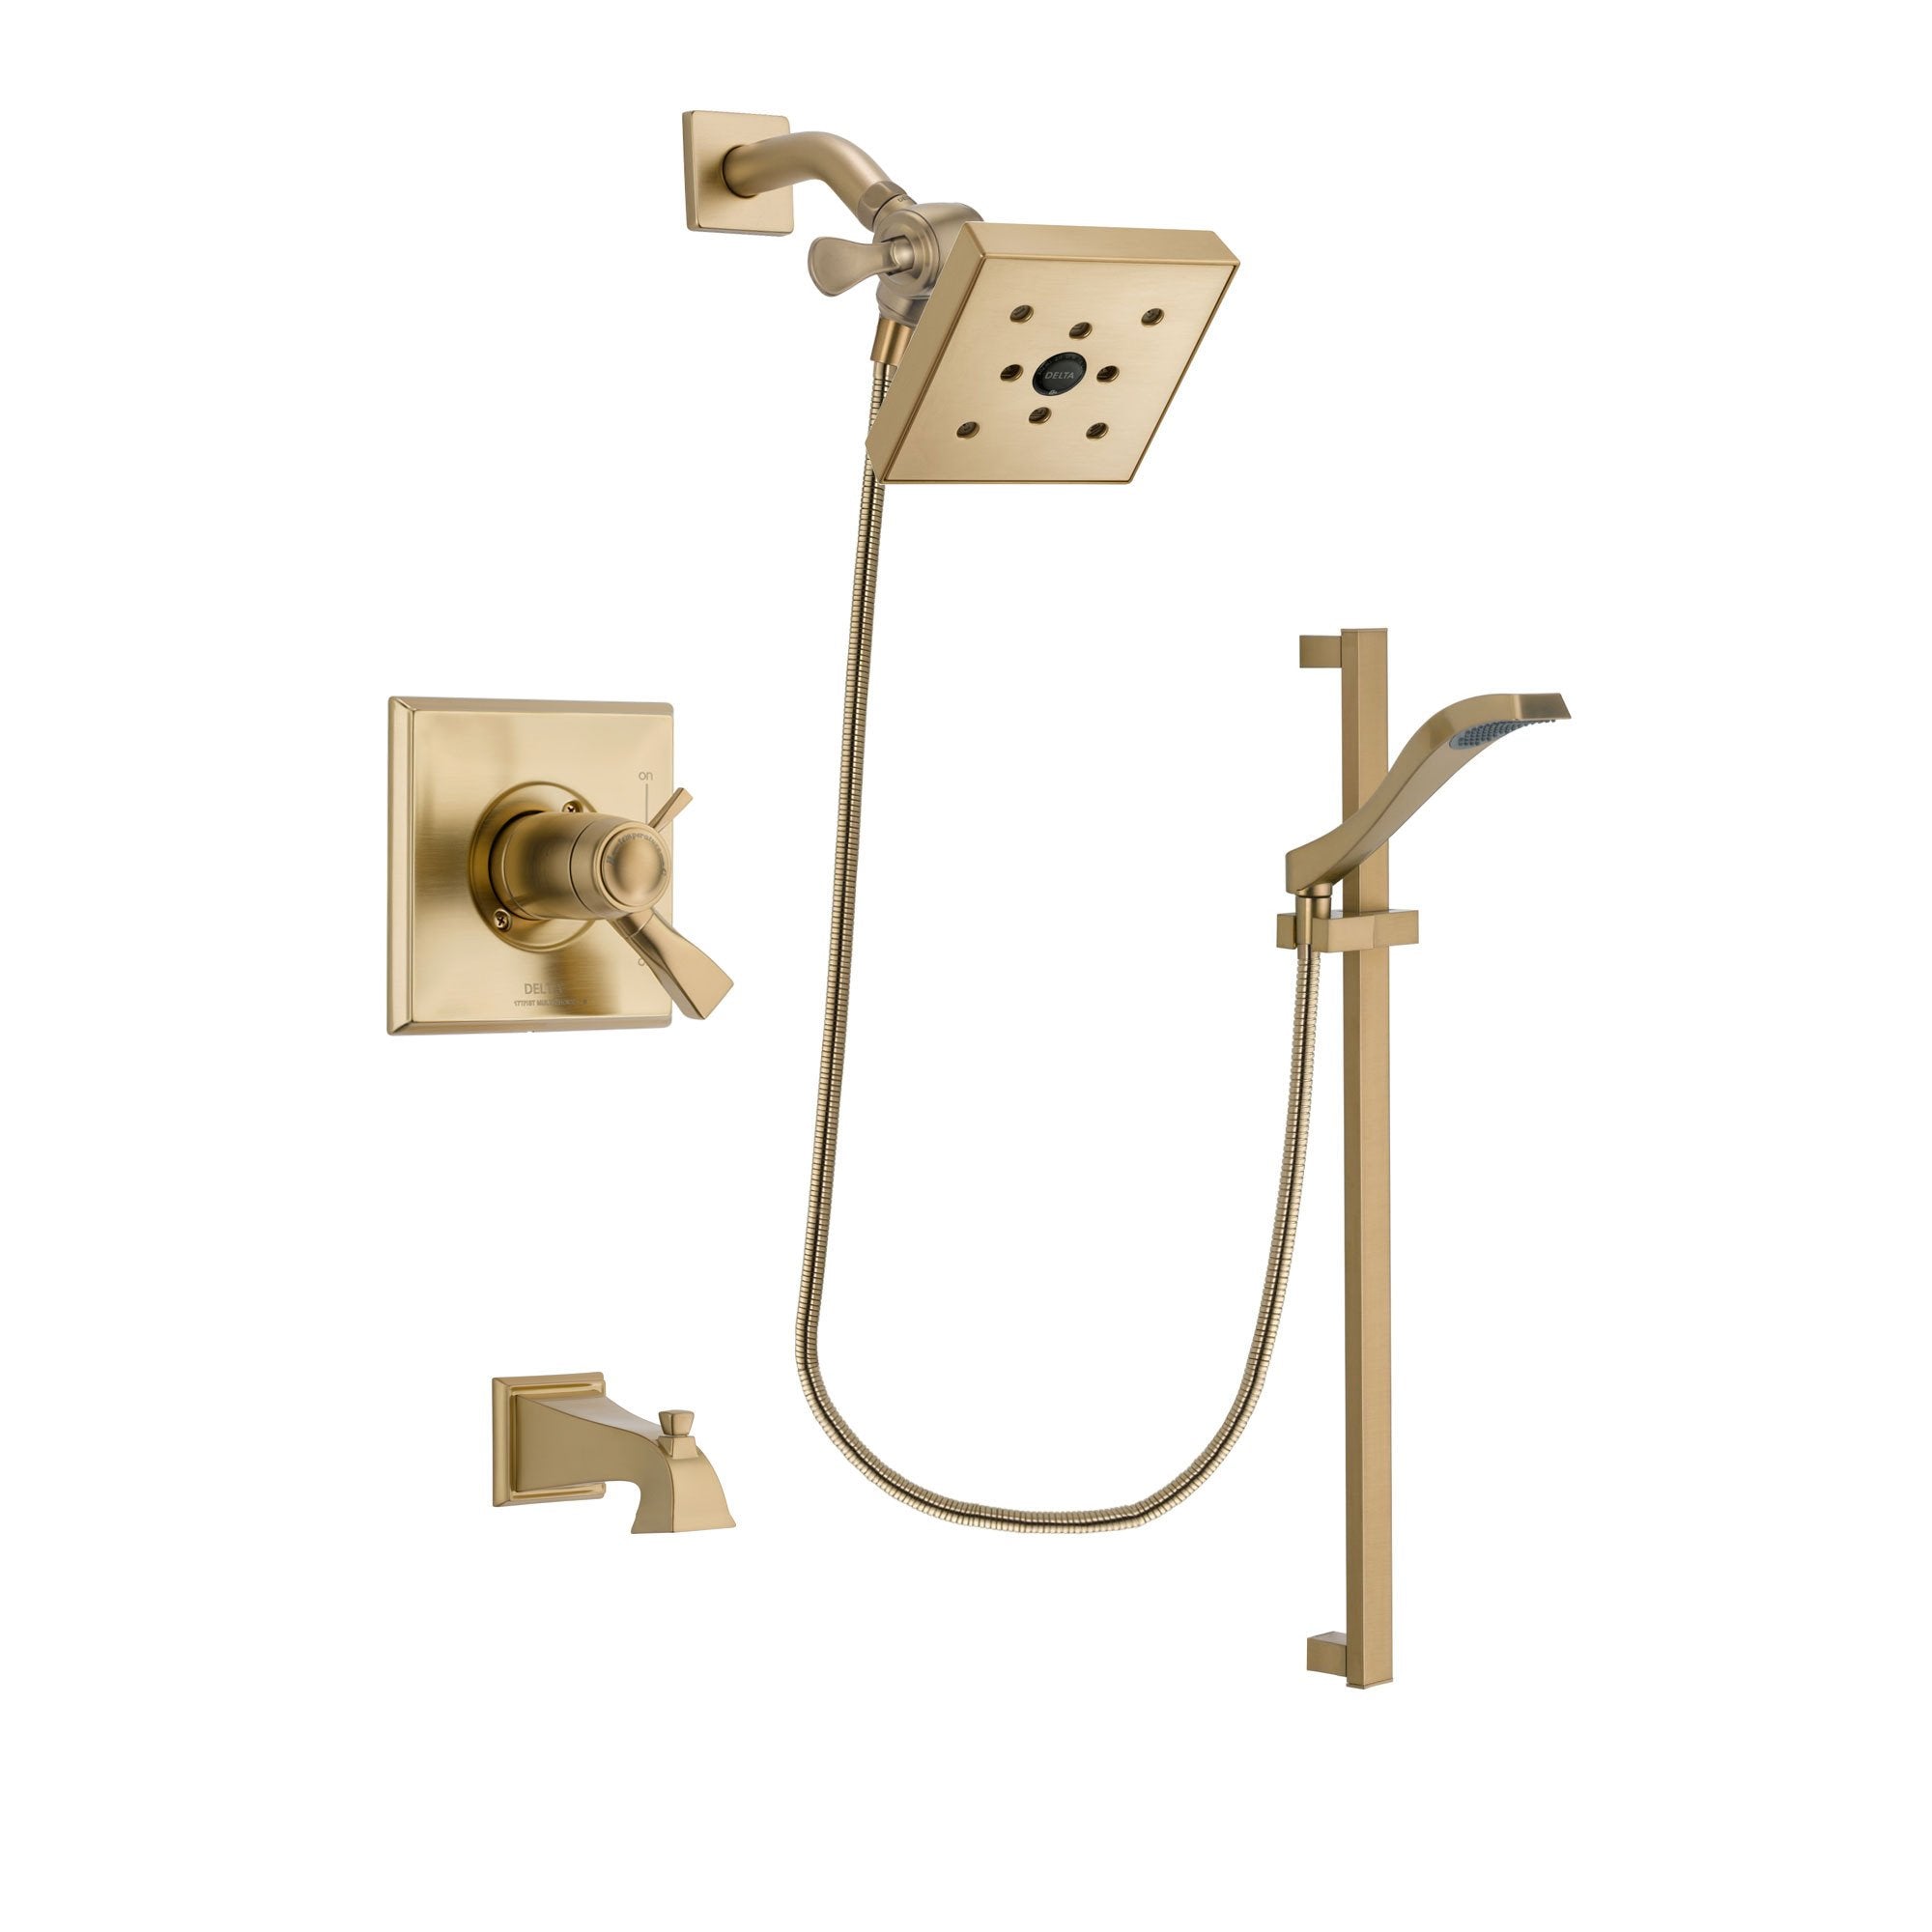 Delta Dryden Champagne Bronze Finish Thermostatic Tub and Shower Faucet System Package with Square Shower Head and Modern Handheld Shower Spray with Slide Bar Includes Rough-in Valve and Tub Spout DSP3933V